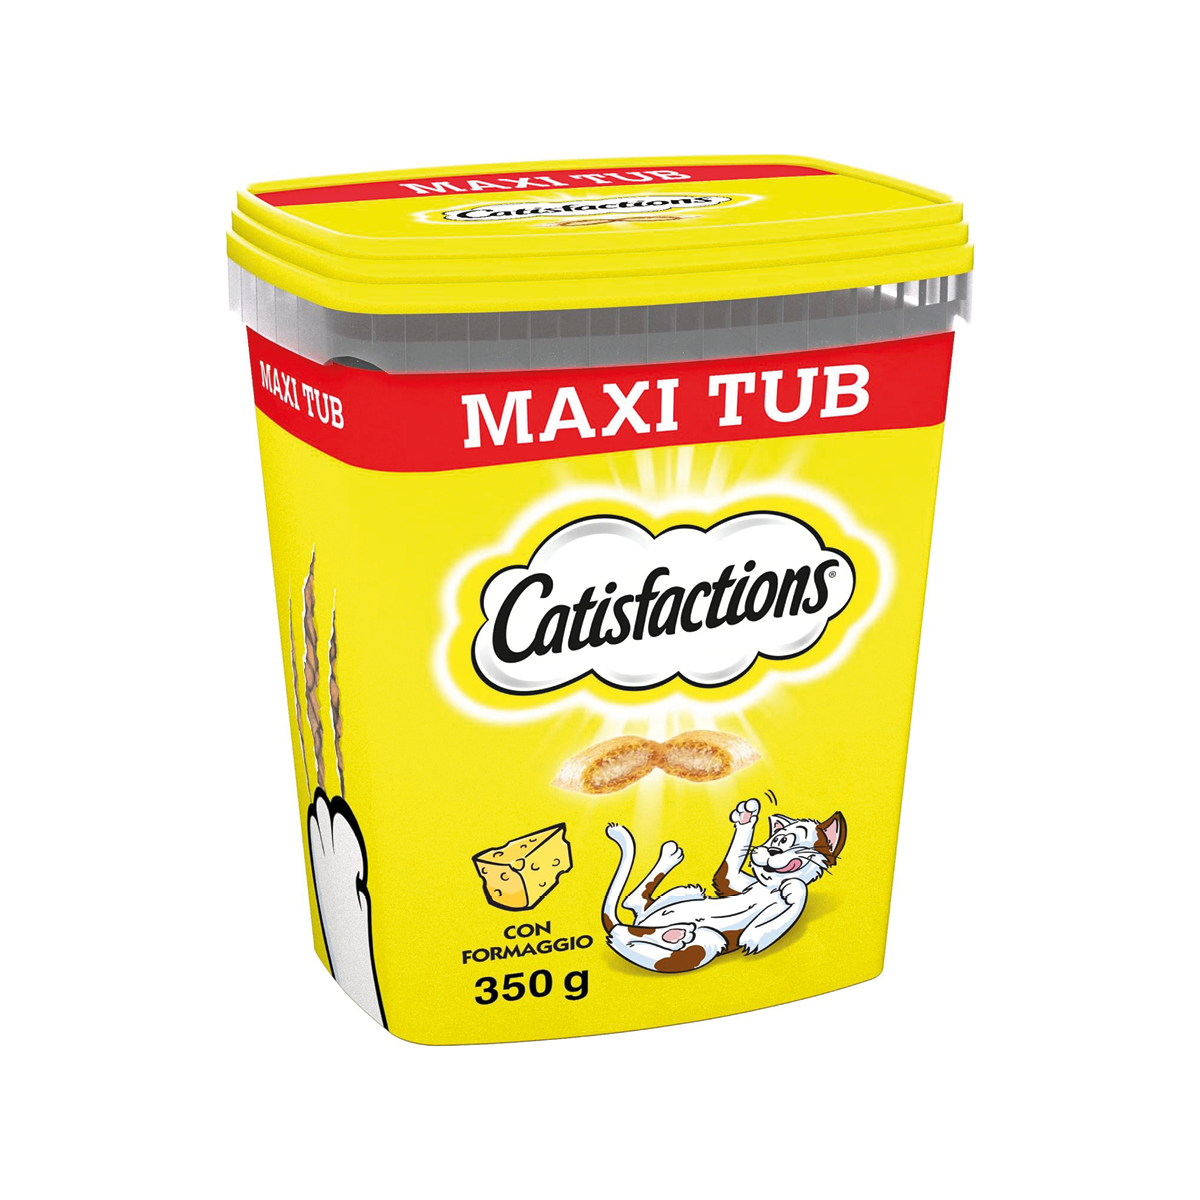 Catisfactions Maxi Tub 350 g